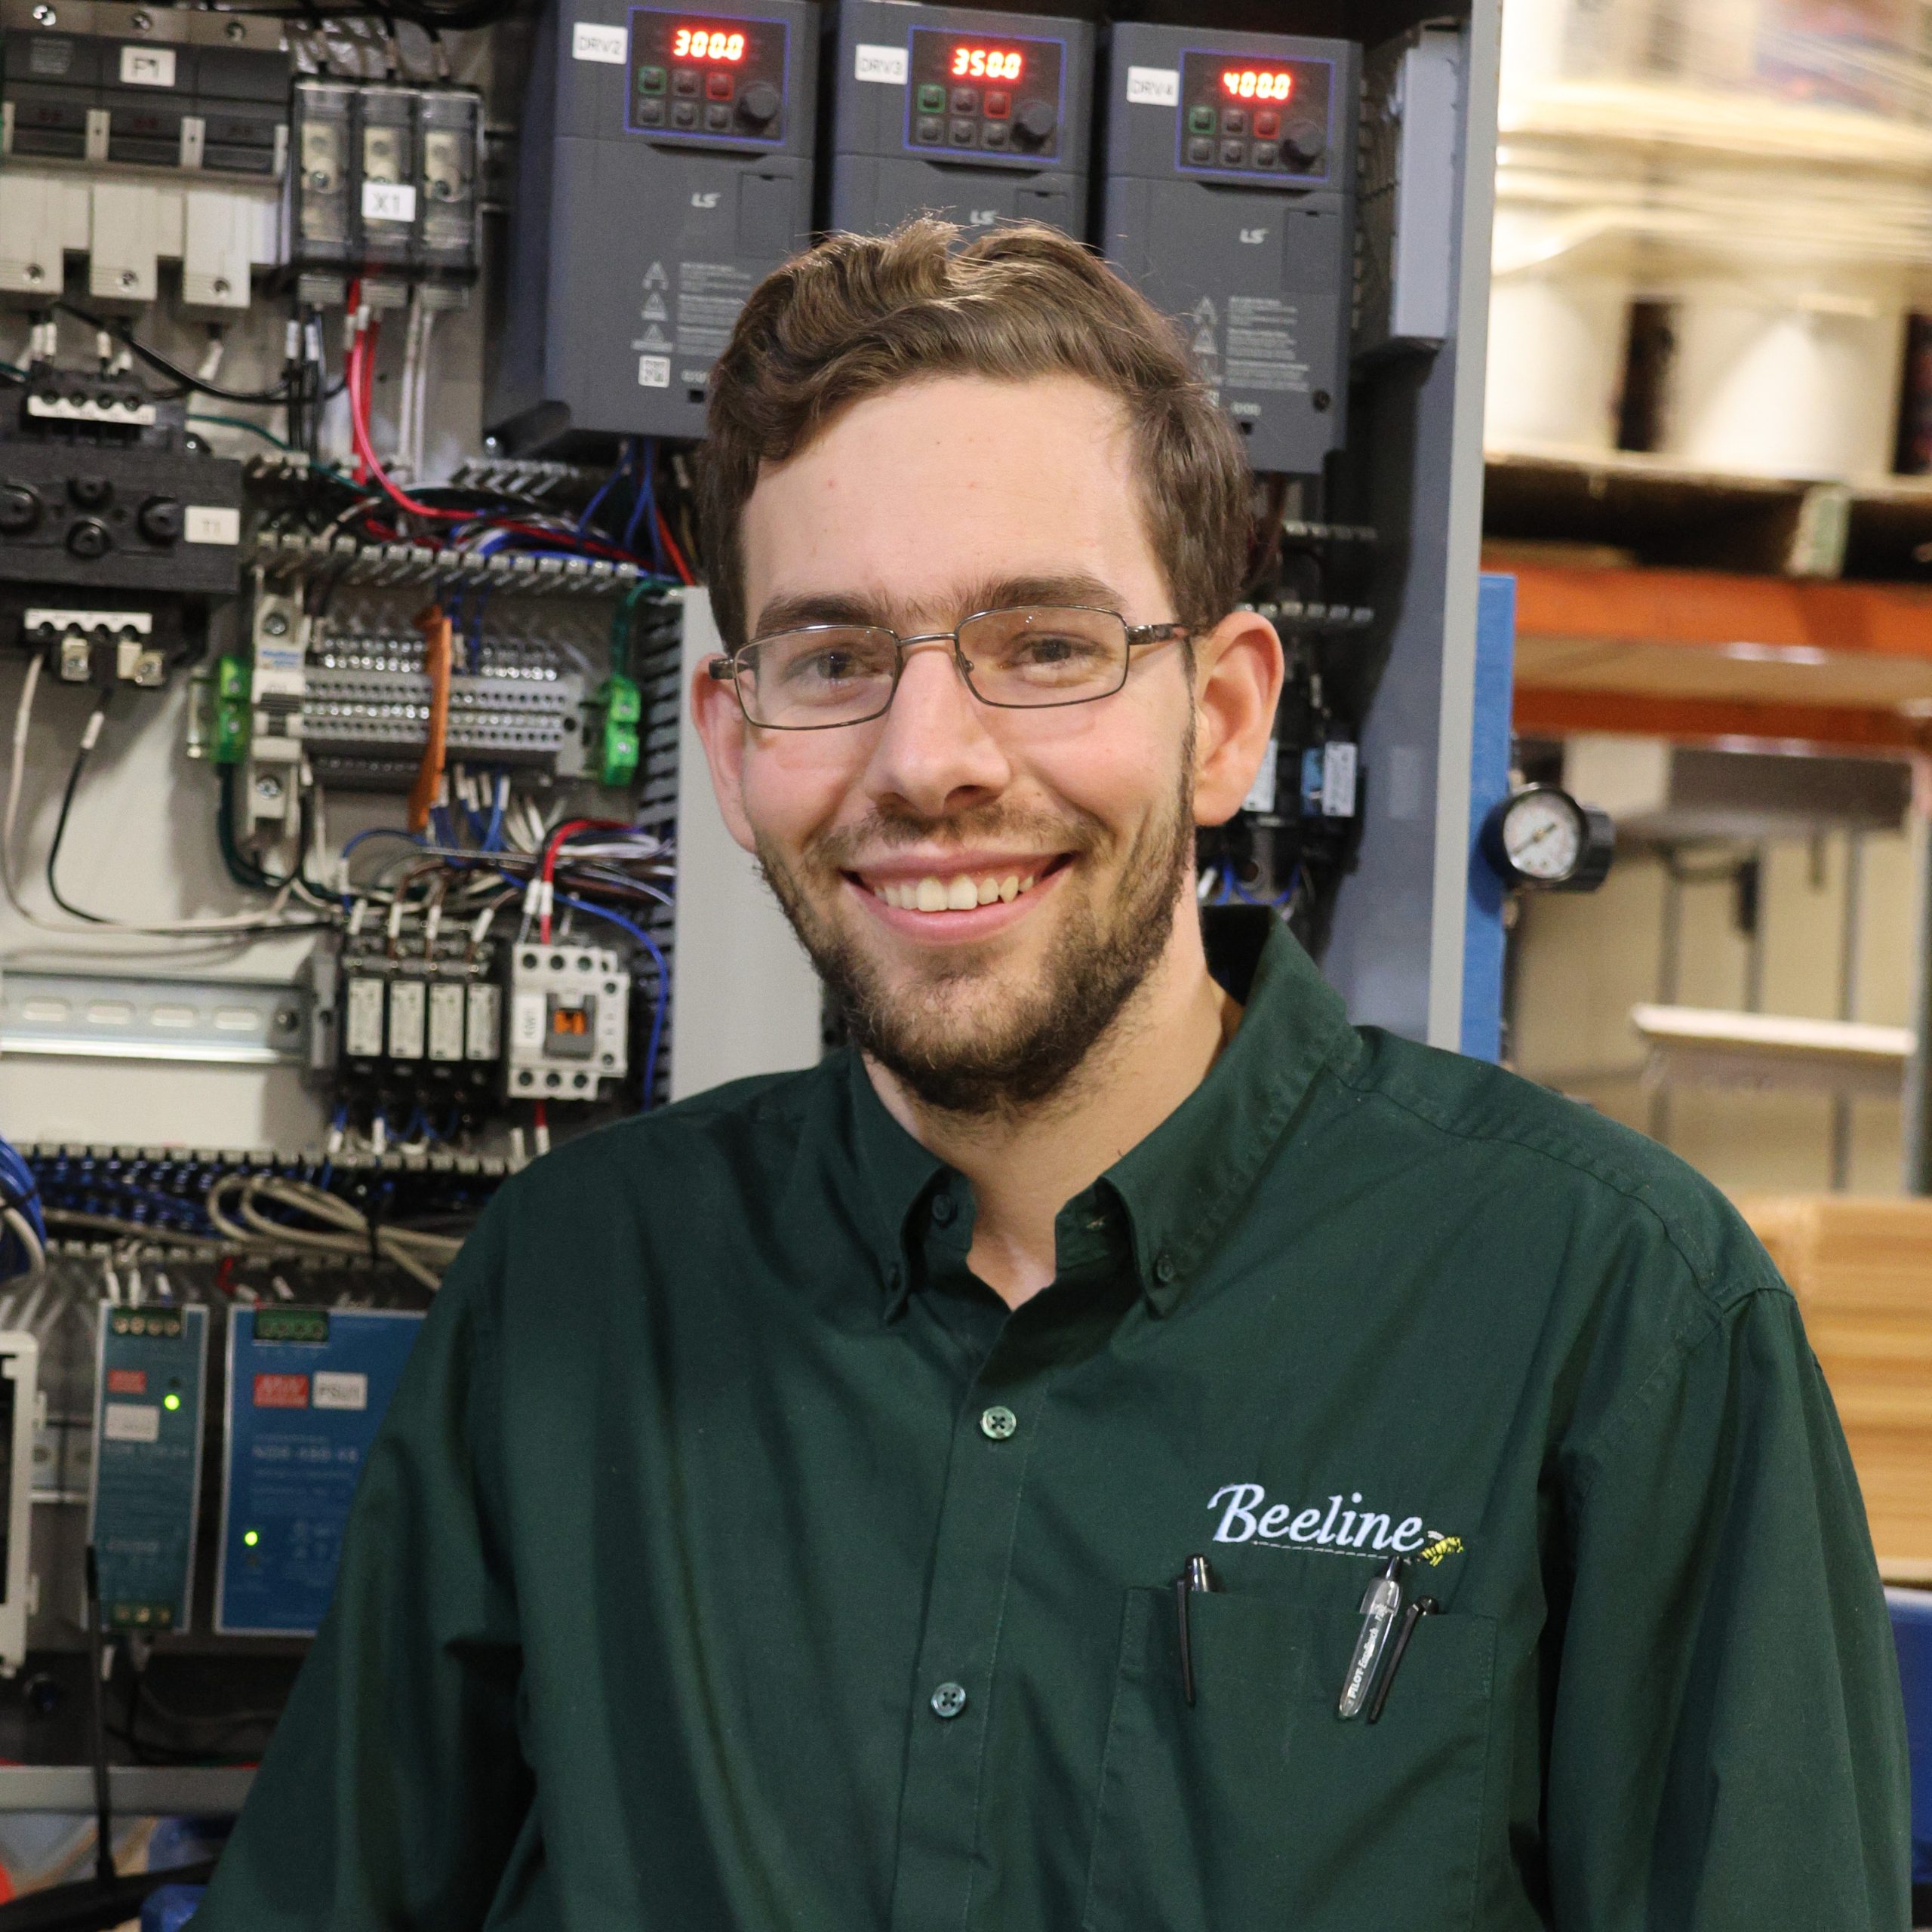 Loyal Showalter is part of the hightly valued team at Beeline. He is the plant technician.